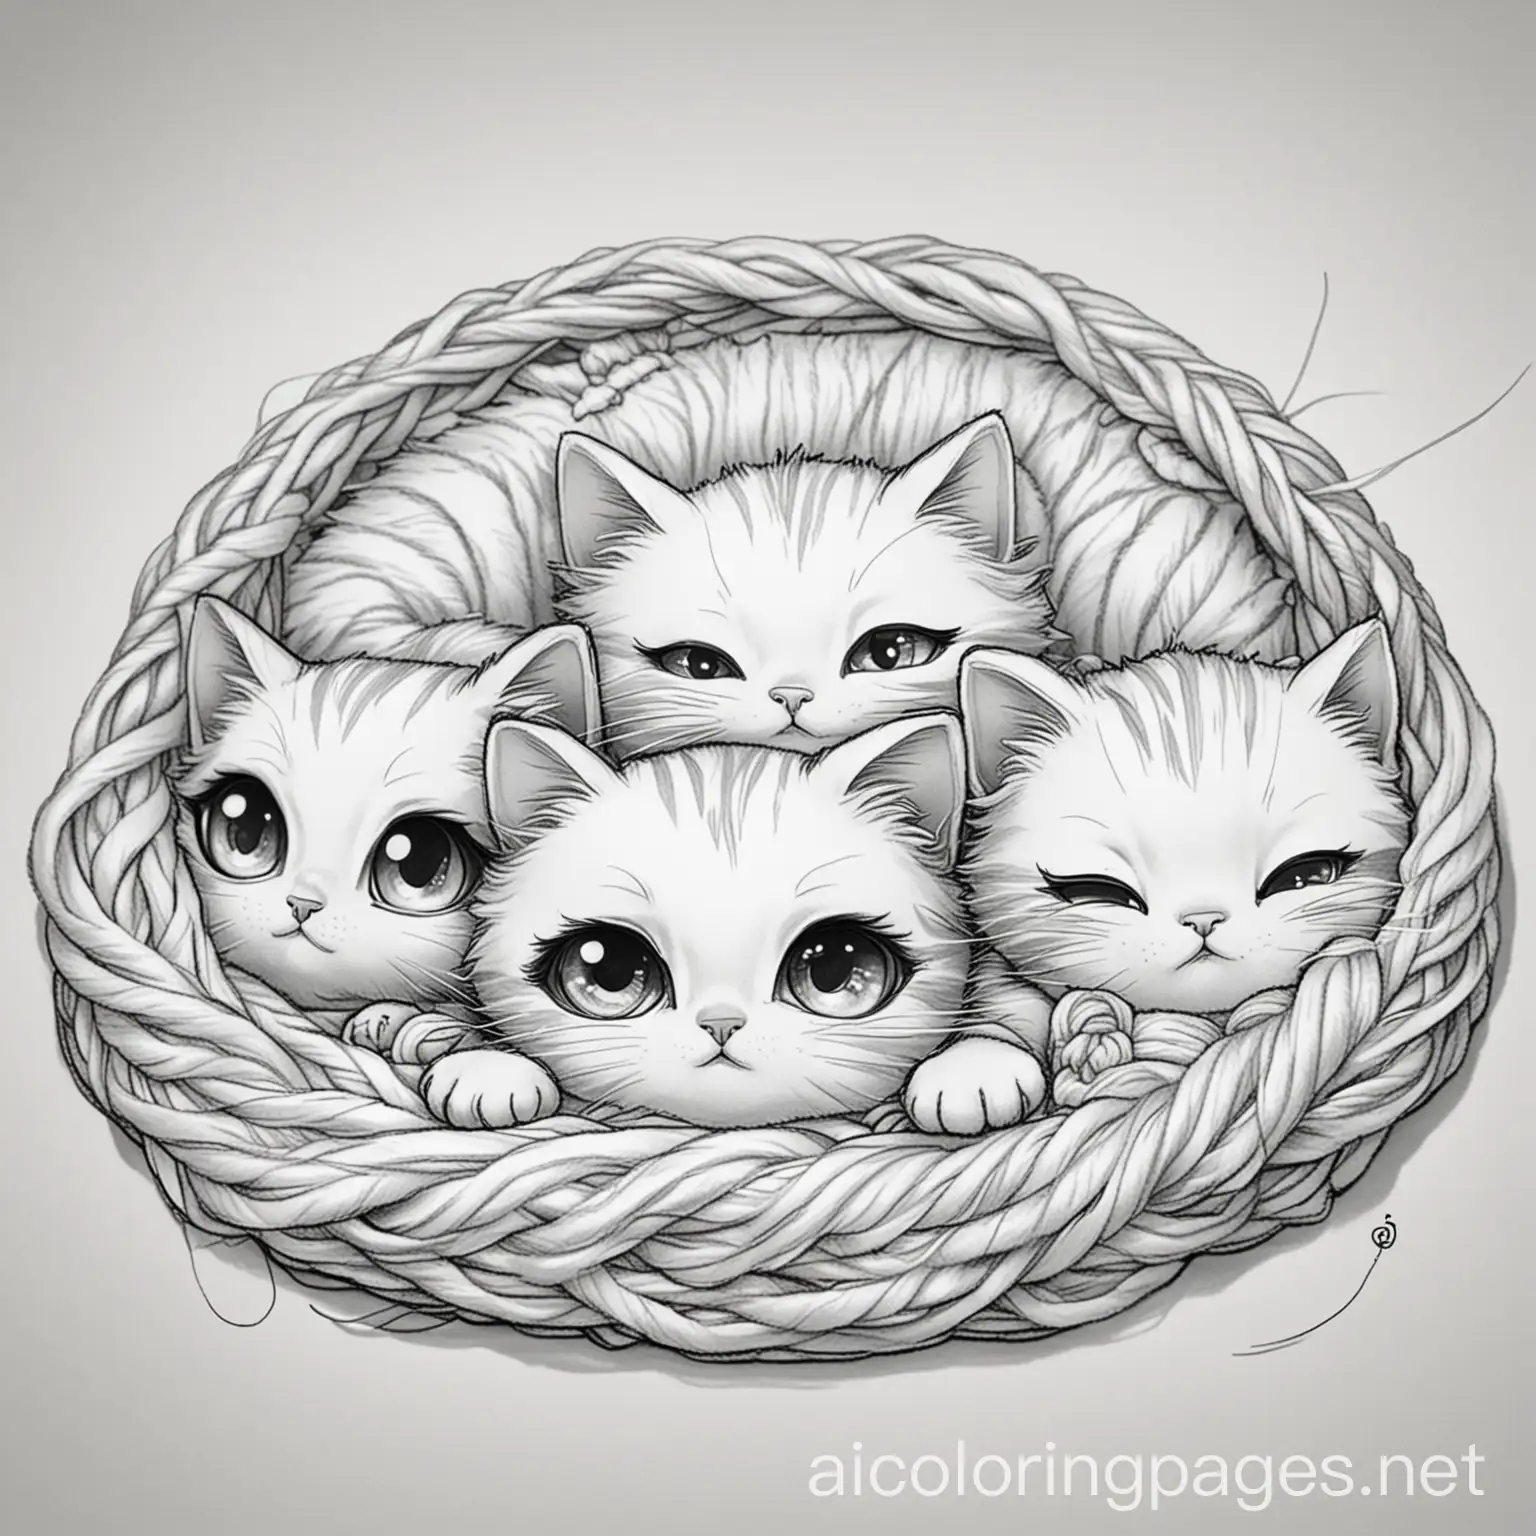 Tiny cats with big eyes, playing with yarn or napping anime style
, Coloring Page, black and white, line art, white background, Simplicity, Ample White Space. The background of the coloring page is plain white to make it easy for young children to color within the lines. The outlines of all the subjects are easy to distinguish, making it simple for kids to color without too much difficulty